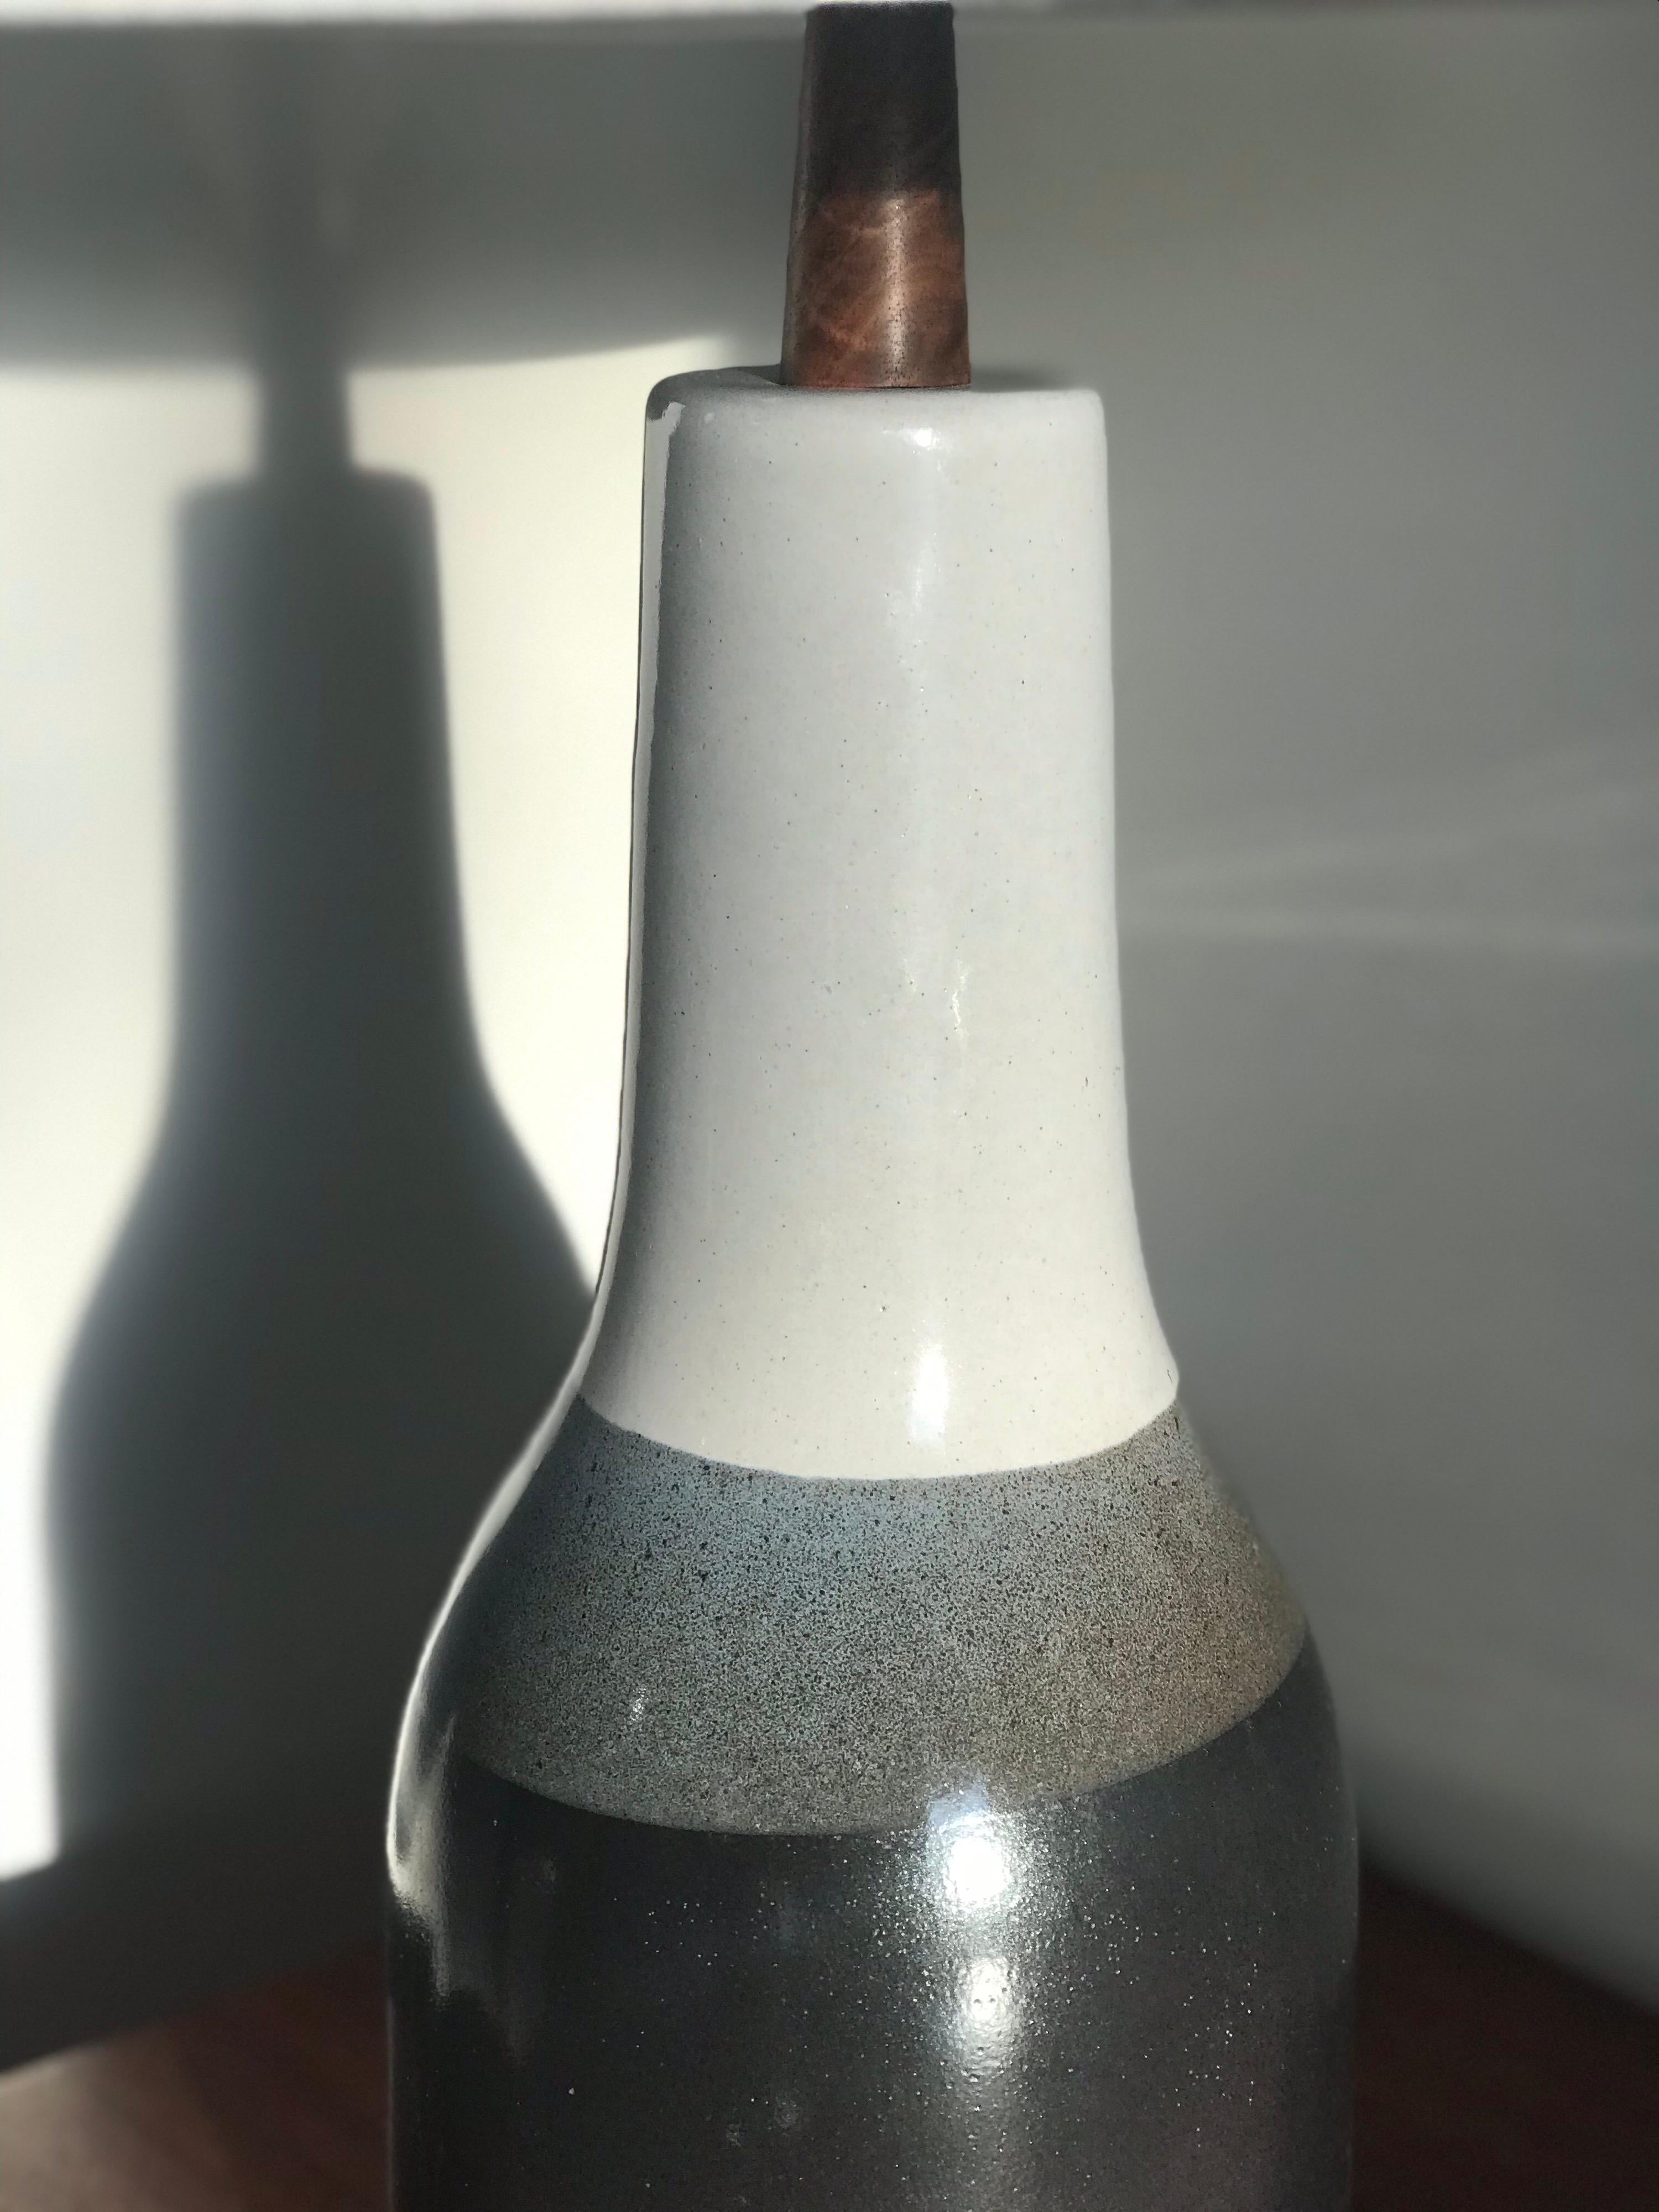 Stunning table lamp by famed ceramicist duo Jane and Gordon Martz for Marshall Studios. Unusual glaze with cascading color palette. 

Measures: Overall
29” tall
15 wide  

Ceramic portion:
14.5” tall
6.5